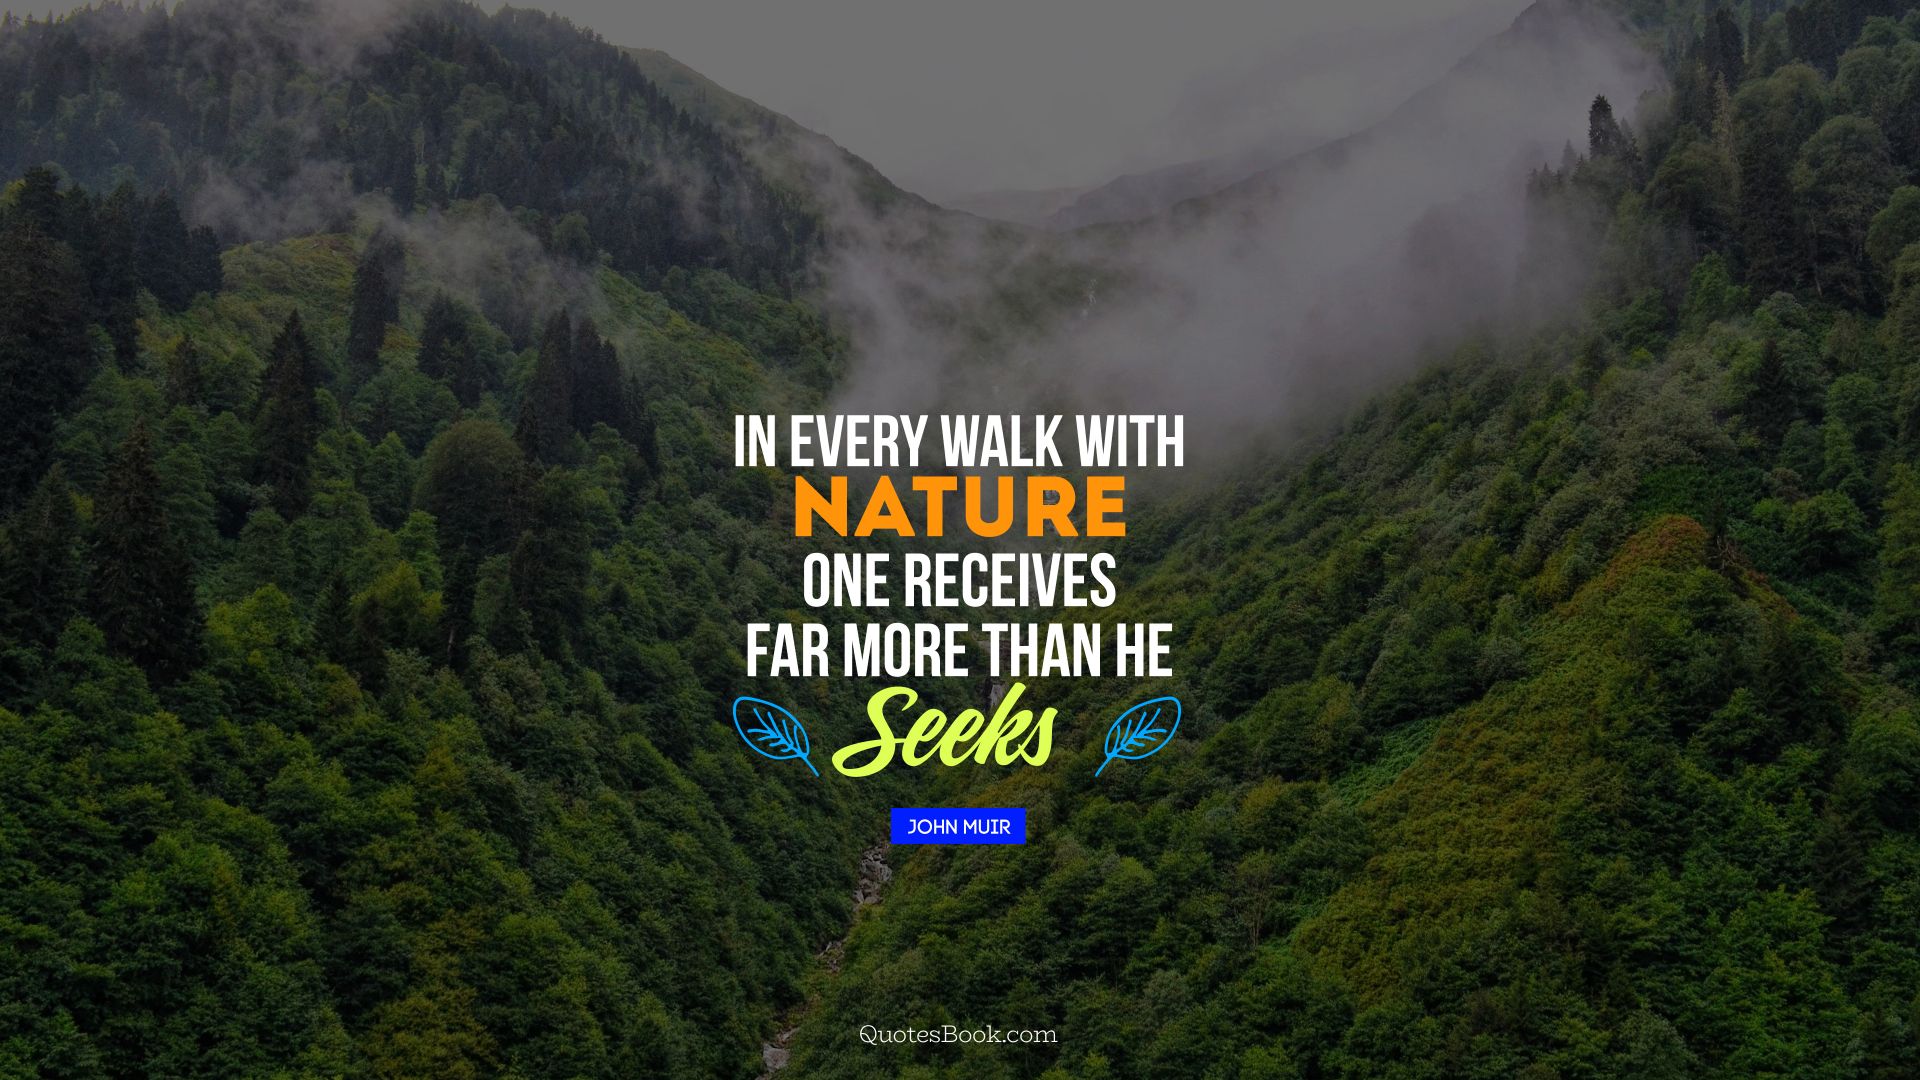 In every walk with nature one receives far more than he seeks. - Quote by John Muir